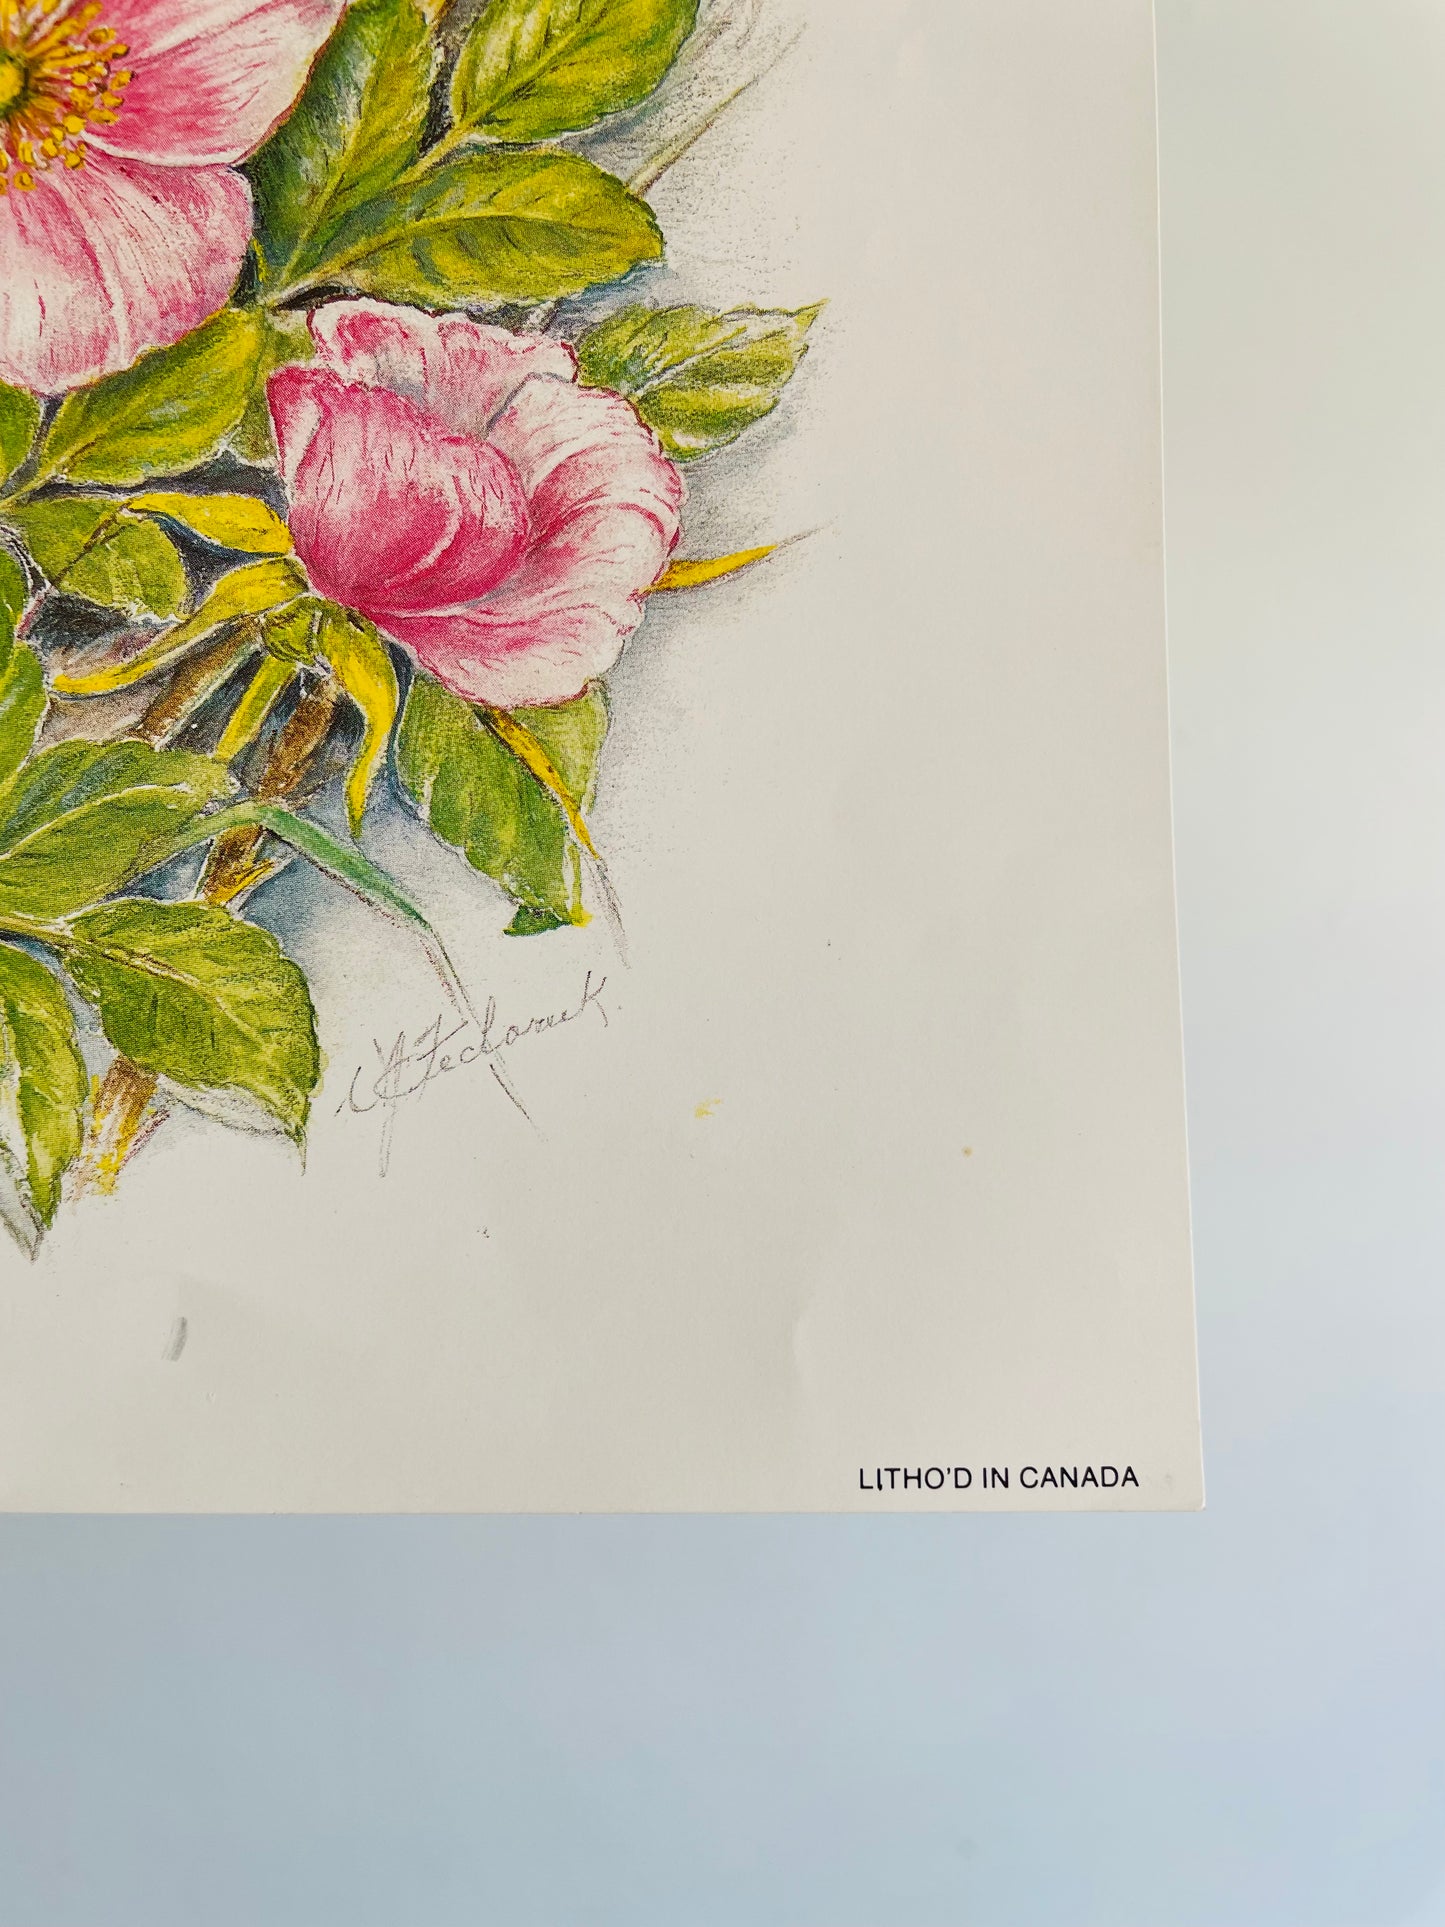 Blush Pink Wild Roses - Floral Lithograph Print Ready for Framing!